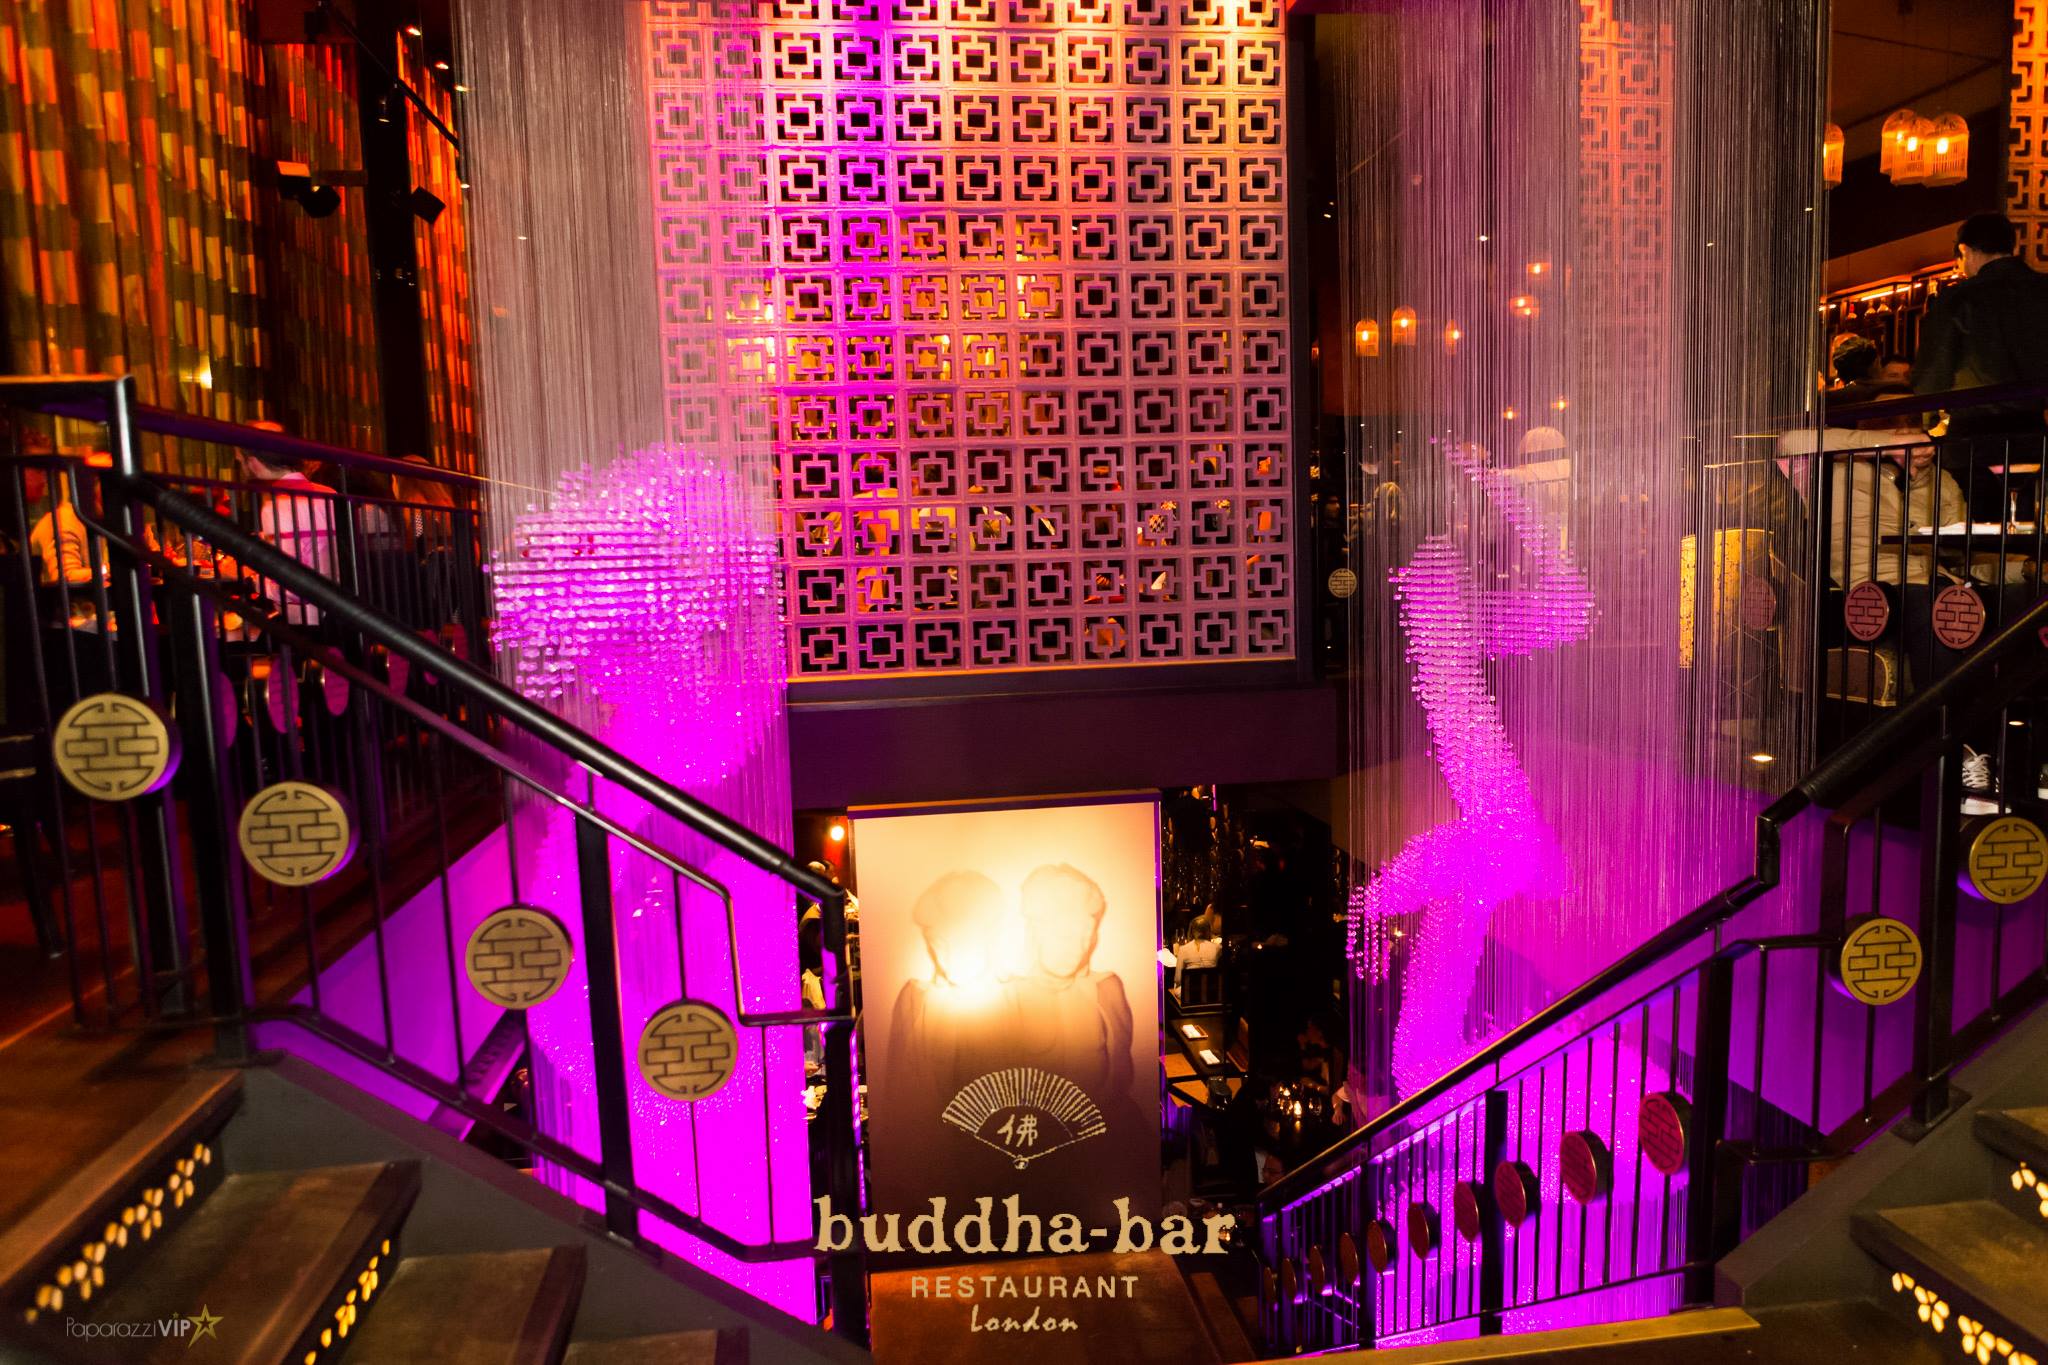 Simply the Best - Buddha Bar is London’s Best Restaurant and Bar for the 2nd year running